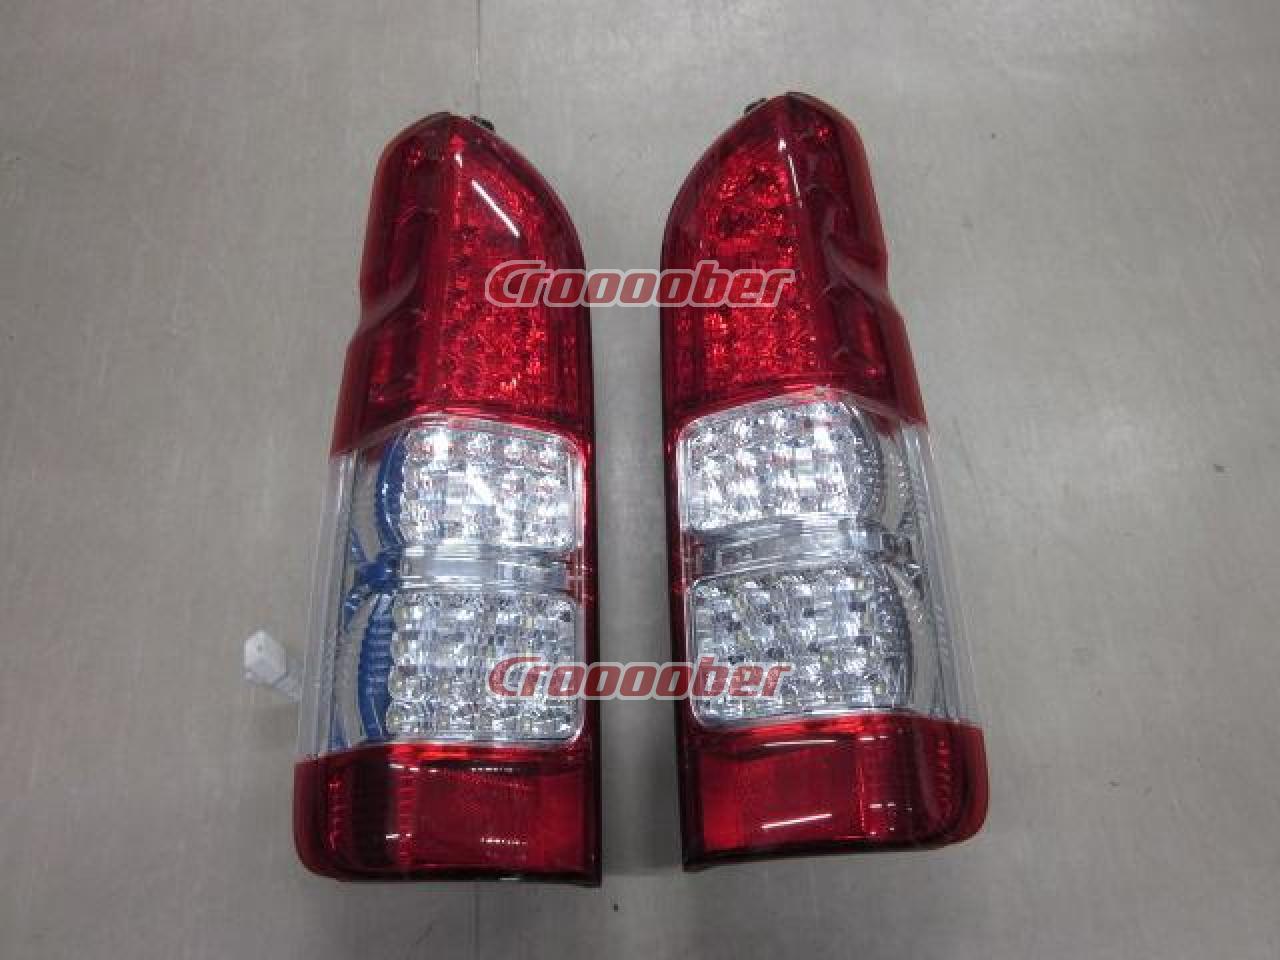 No Brand Full LED Tail Lens | Tail Lamps | Croooober